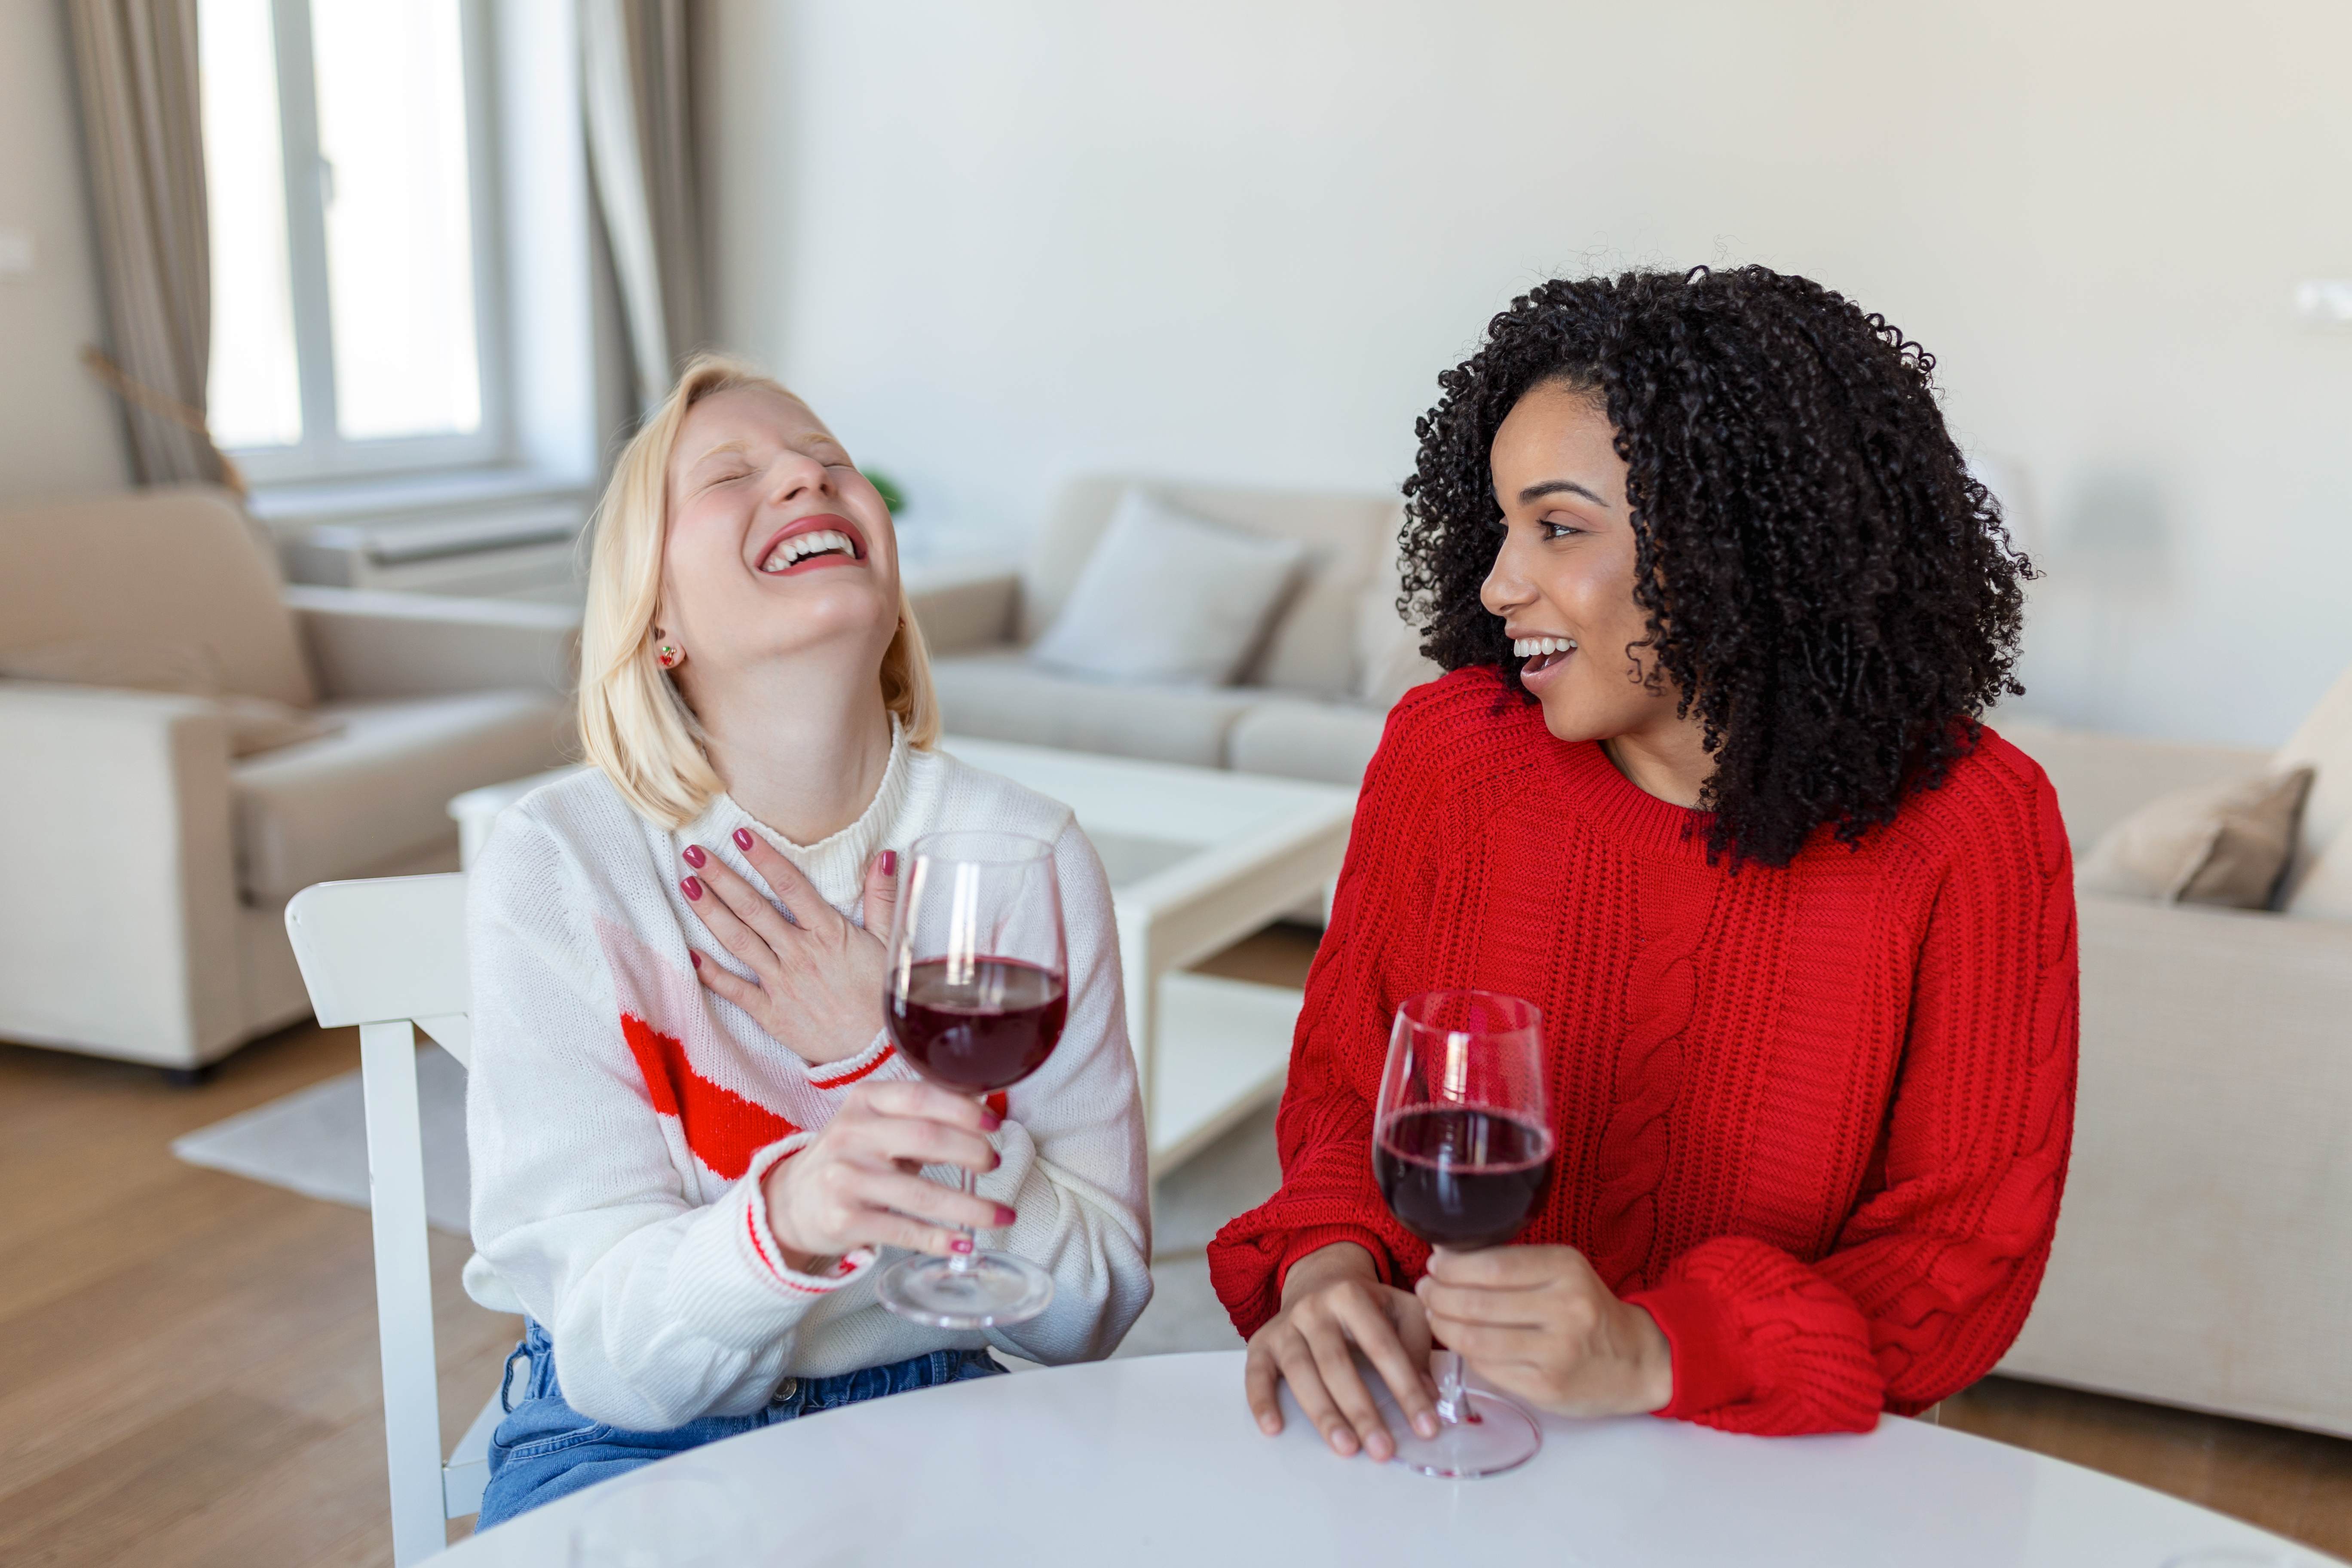 Taurus best friends unwind together with a glass of wine.